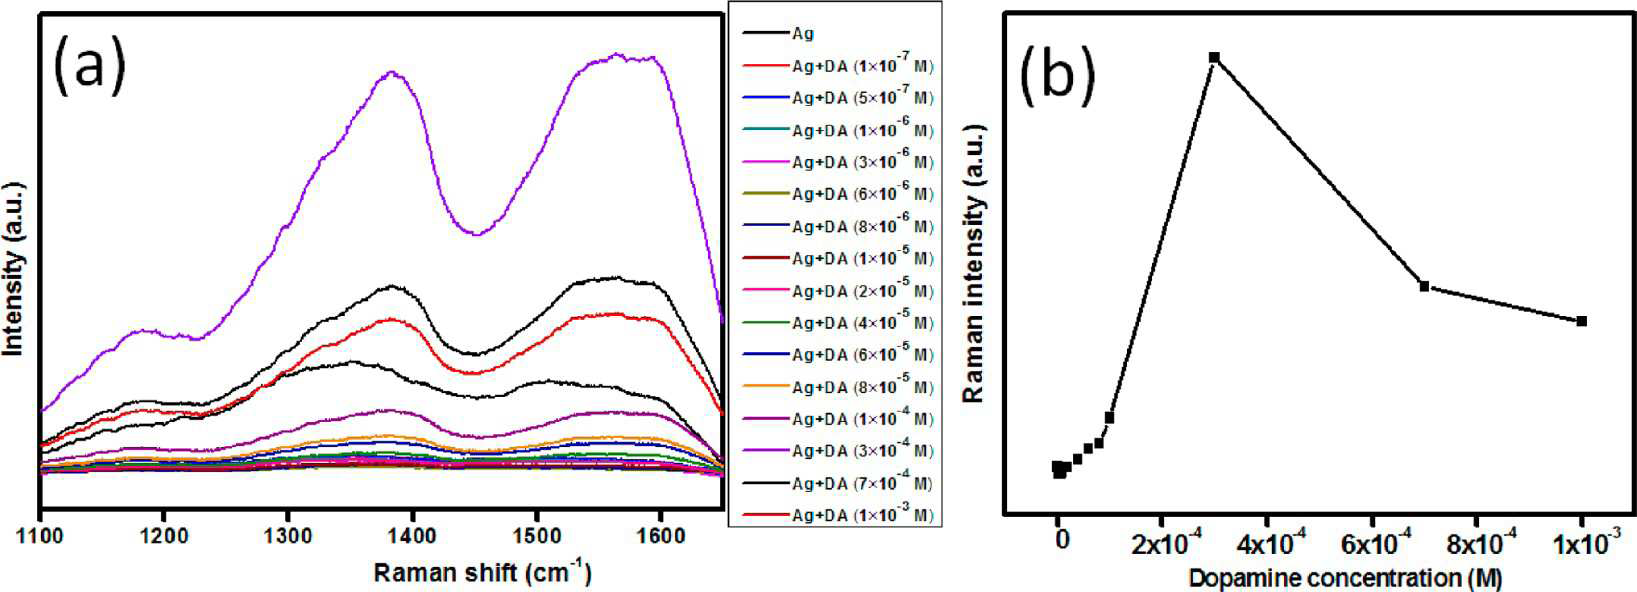 (a) Raman spectra of different concentrations of DA (1×10−7 to 1×10−3 M) adsorbed on Ag NPs. (b) Raman intensity of DA adsorbed on Ag NPs at 1590 cm− 1 with increasing DA concentration.